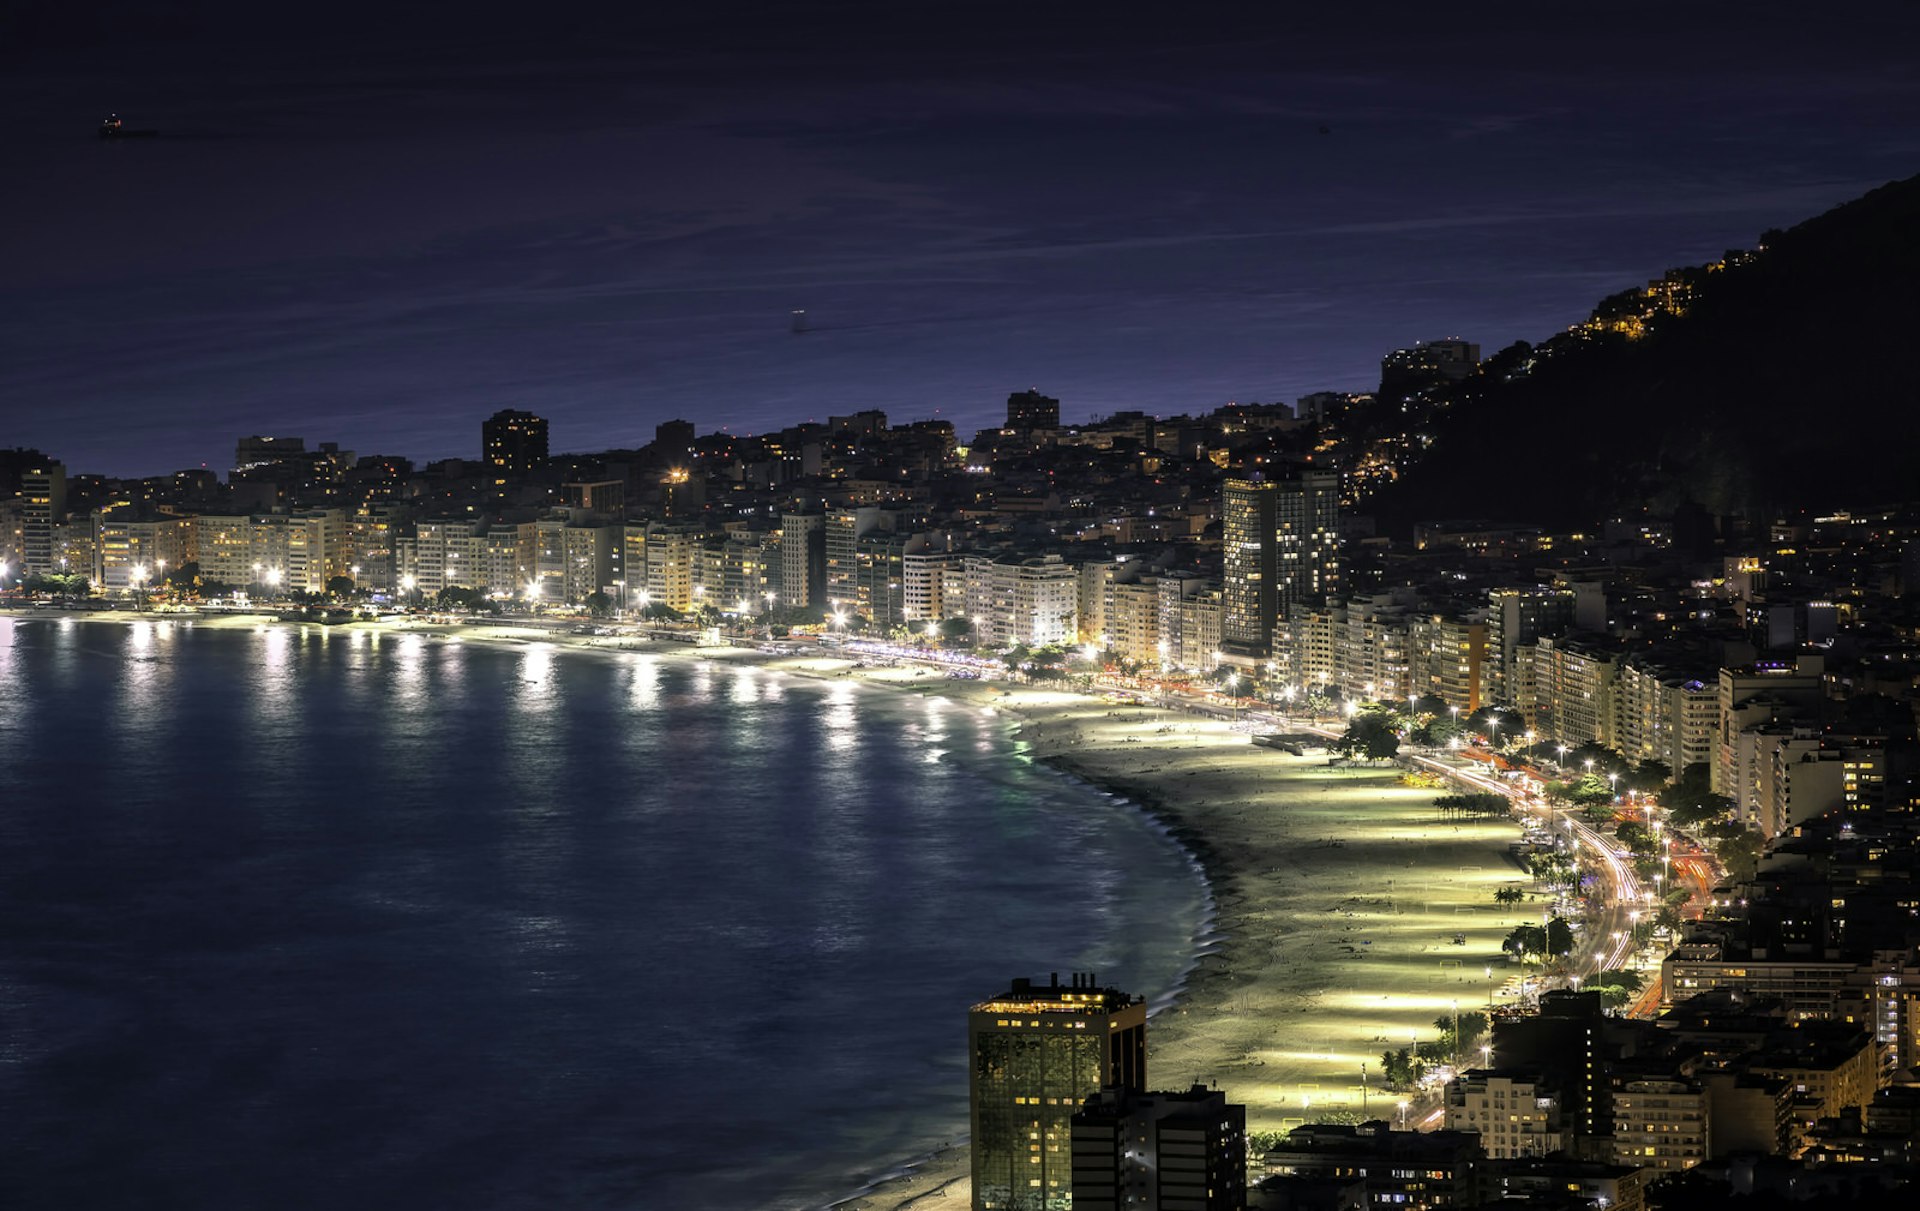 Copacabana Beach at night © marchello74 / Getty Images